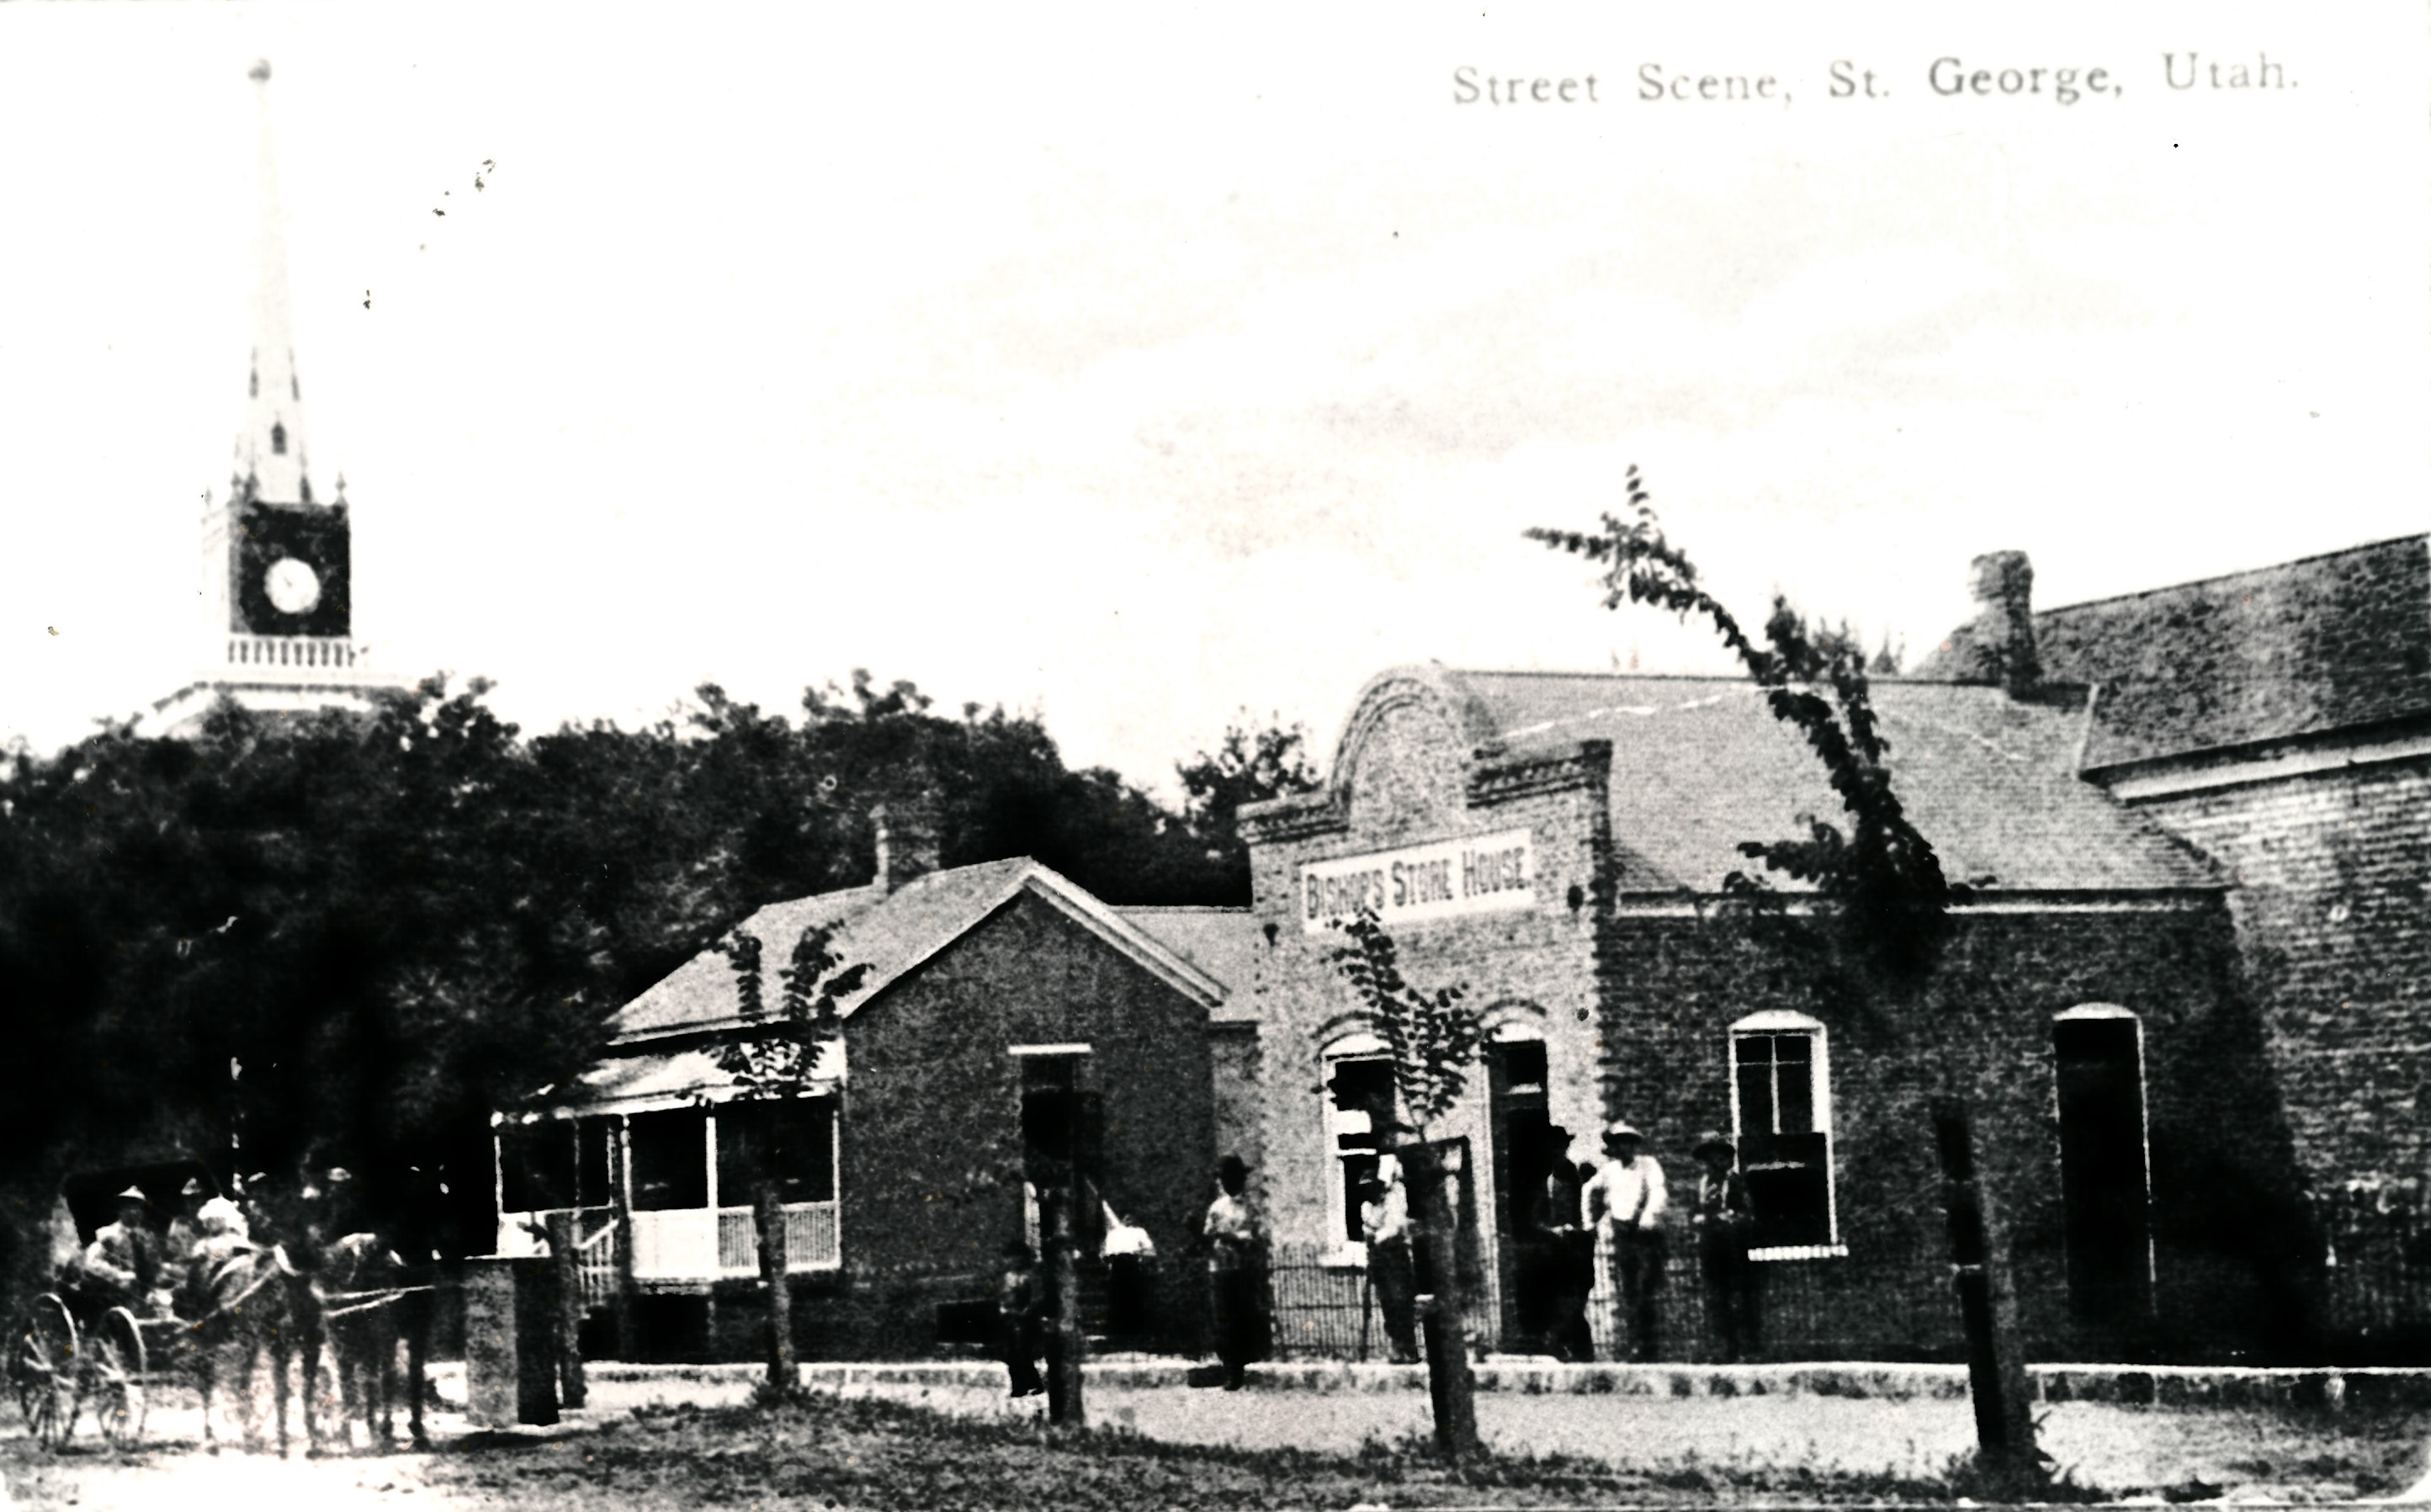 The old telegraph office and Bishops' Store House in St. George